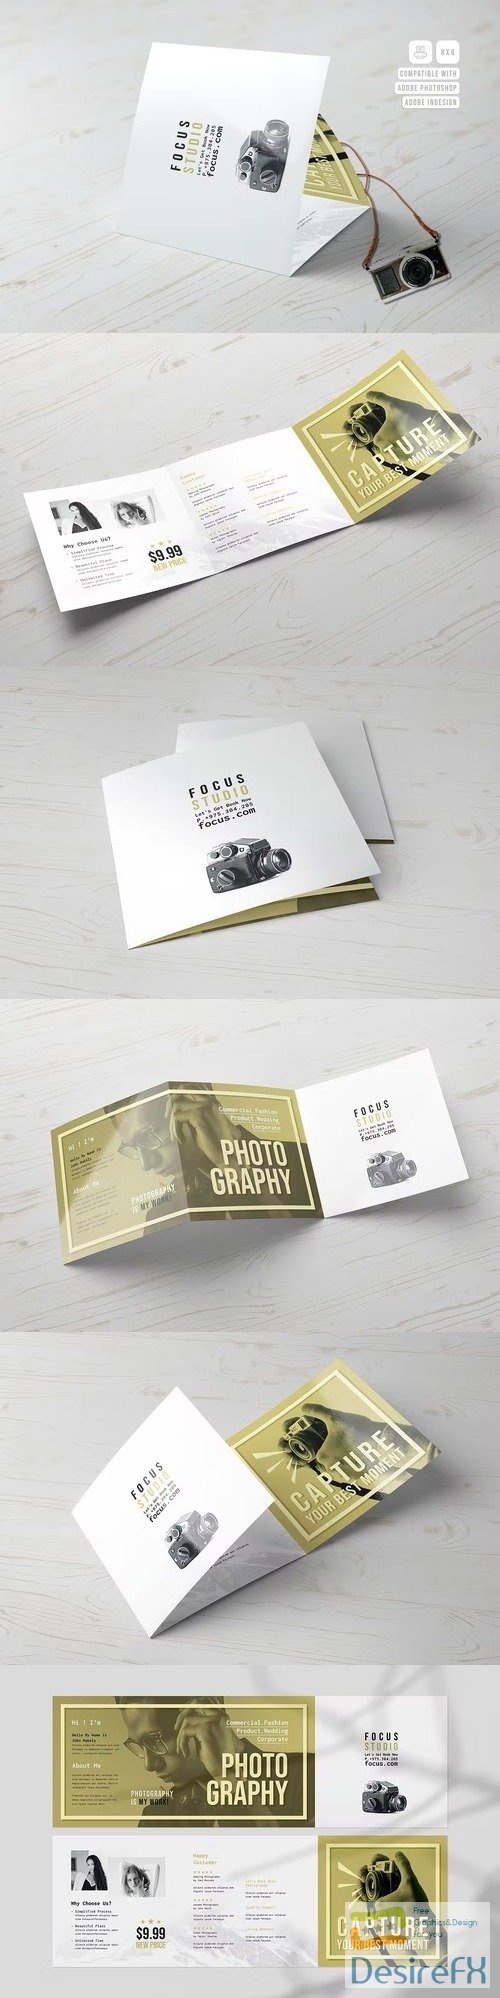 Photography Square Trifold Brochure